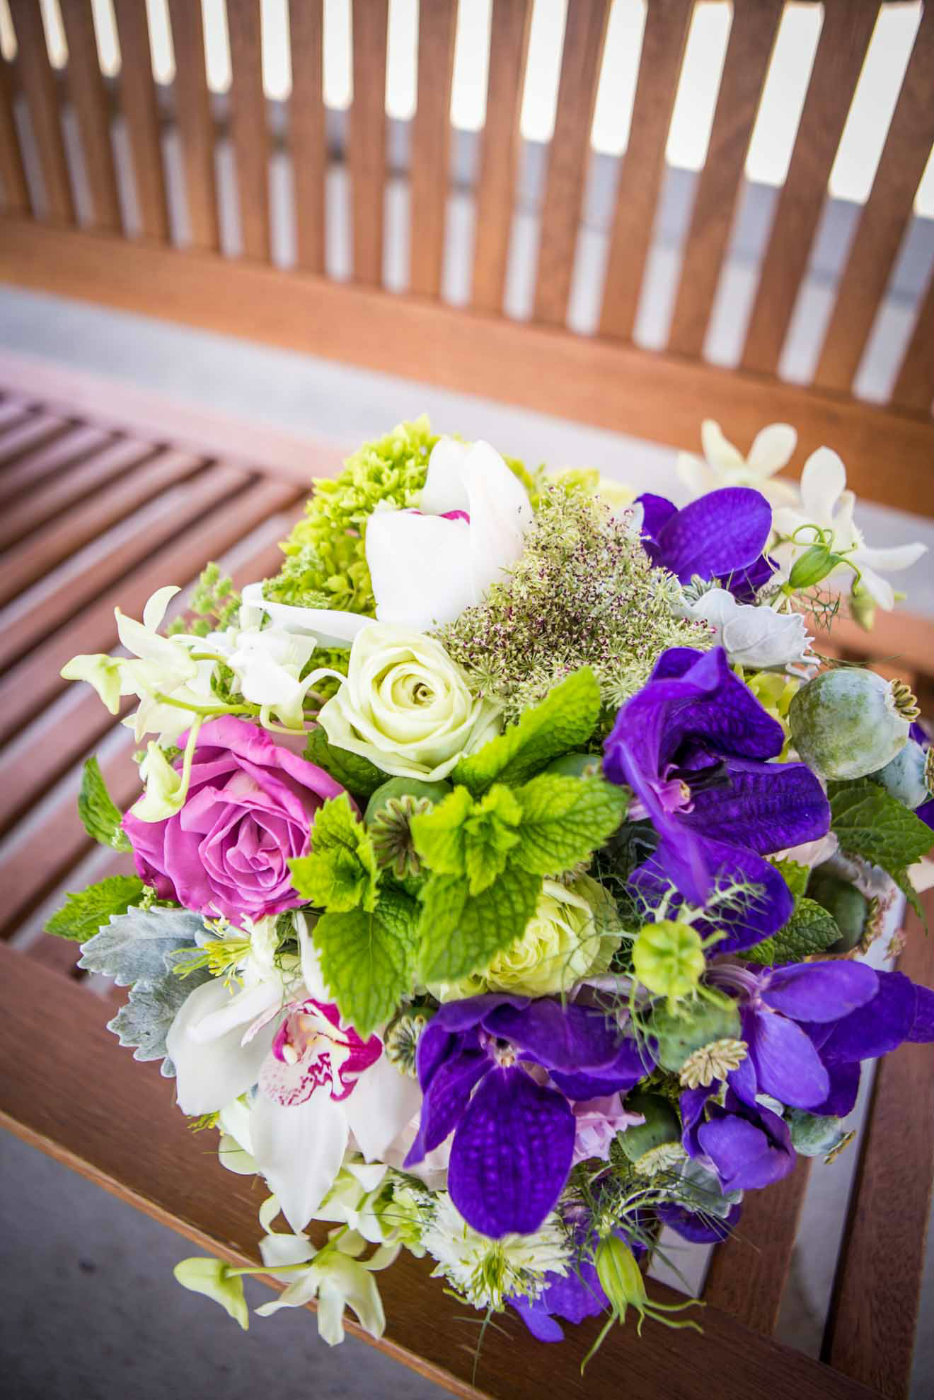 Bridal bouquet of purple roses, purple orchids. white roses, and herbs